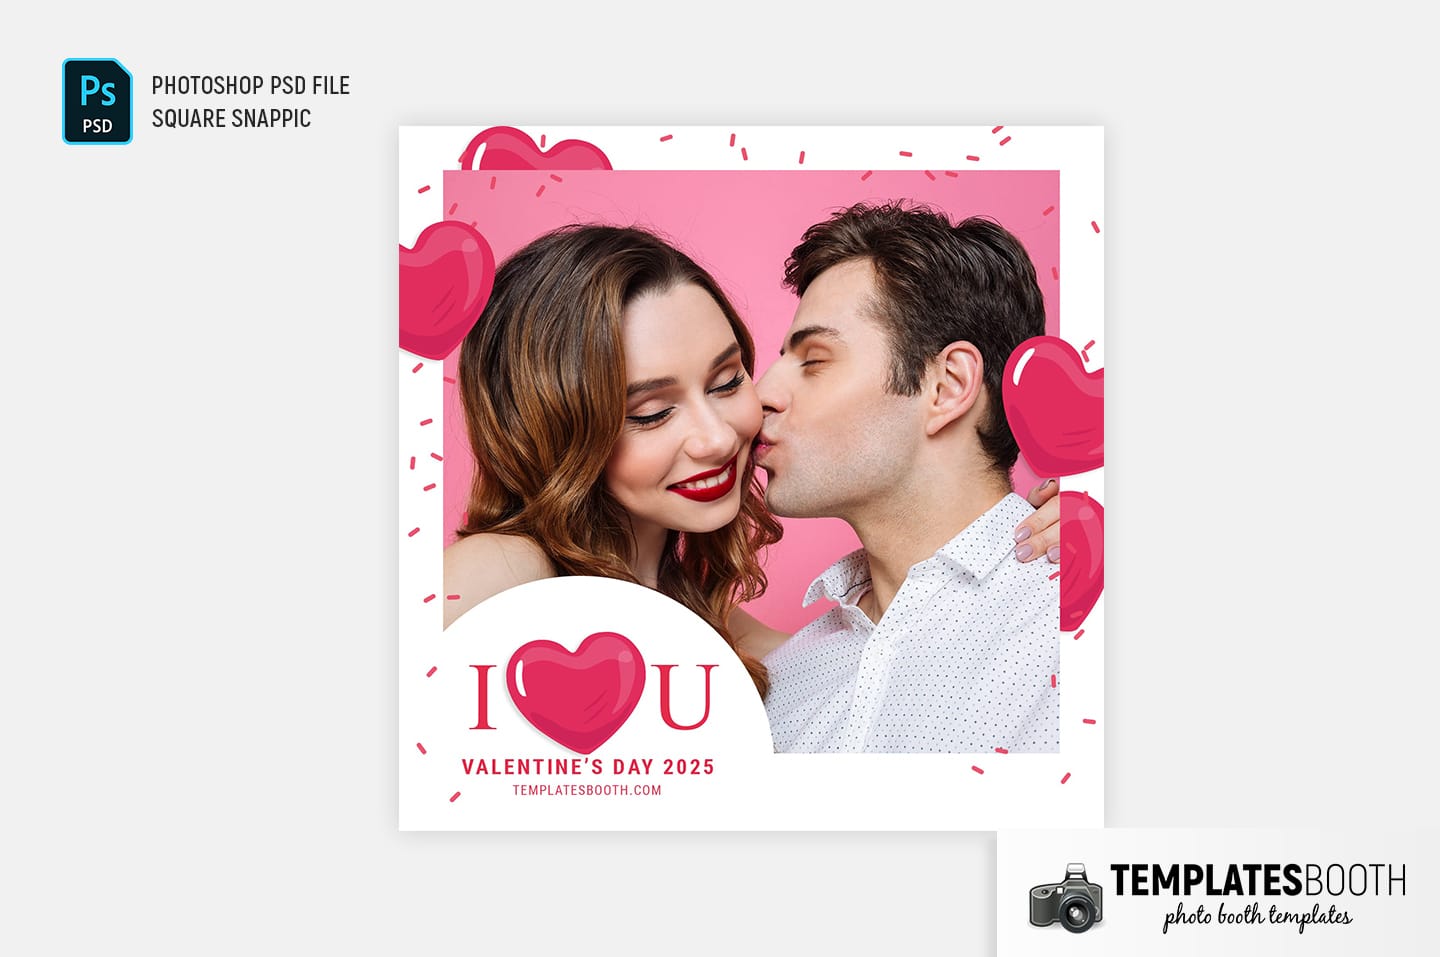 I Love You Valentine's Day Photo Booth Template (For Snappic)